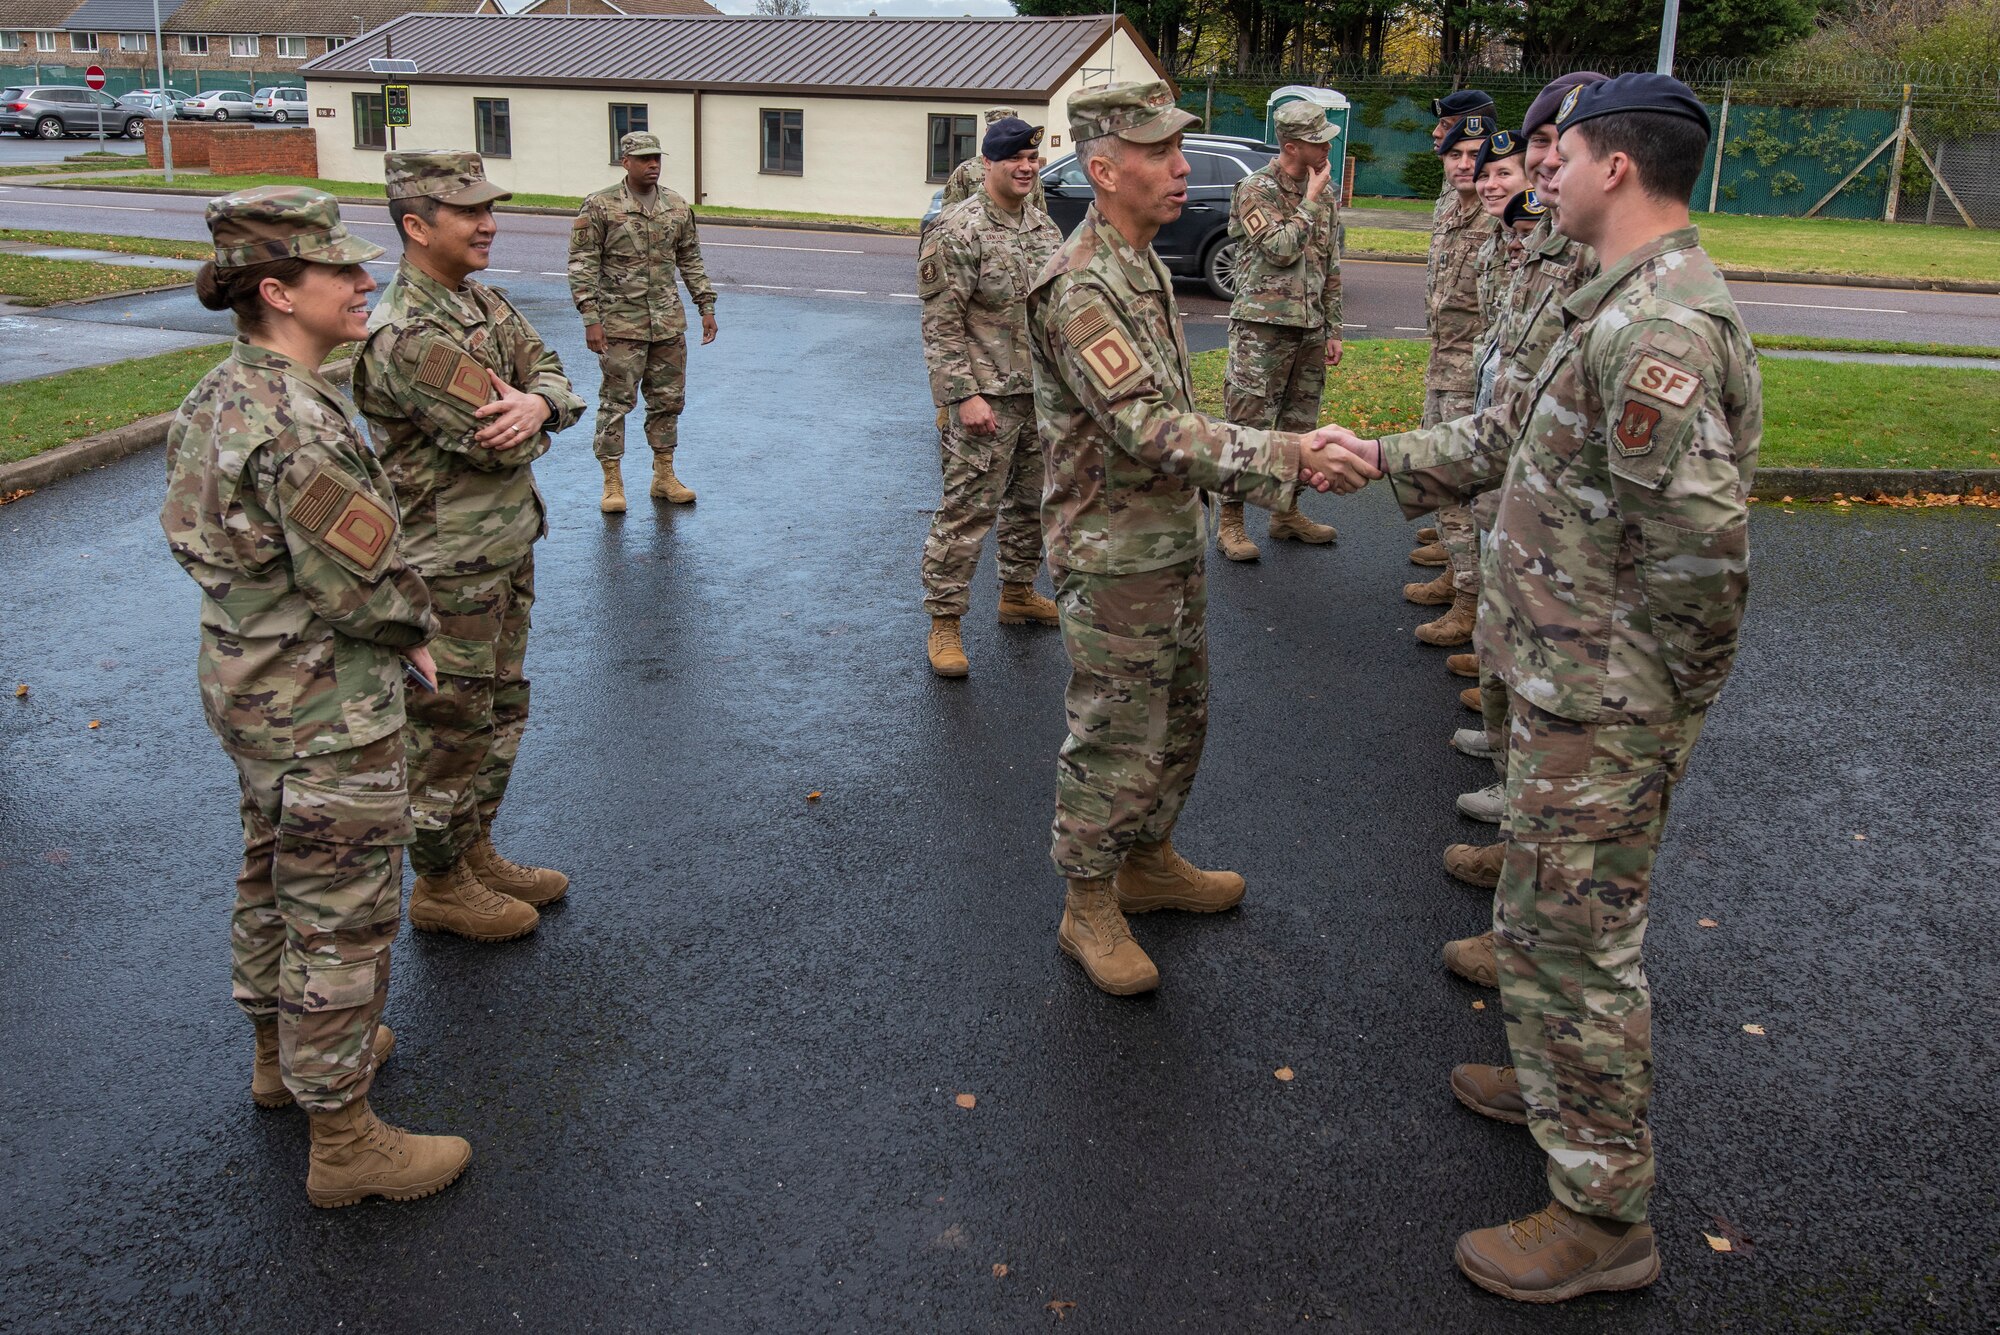 Maj. Gen. John Wilcox, Air Force Installation and Mission Support Center commander, greets members of the 100th Security Forces Squadron Nov. 22, 2019, at RAF Mildenhall, England. The AFIMSC provides base communications, civil engineering, security forces and logistics support that assists Team Mildenhall in fulfilling its mission sets. (U.S. Air Force photo by Airman 1st Class Joseph Barron)